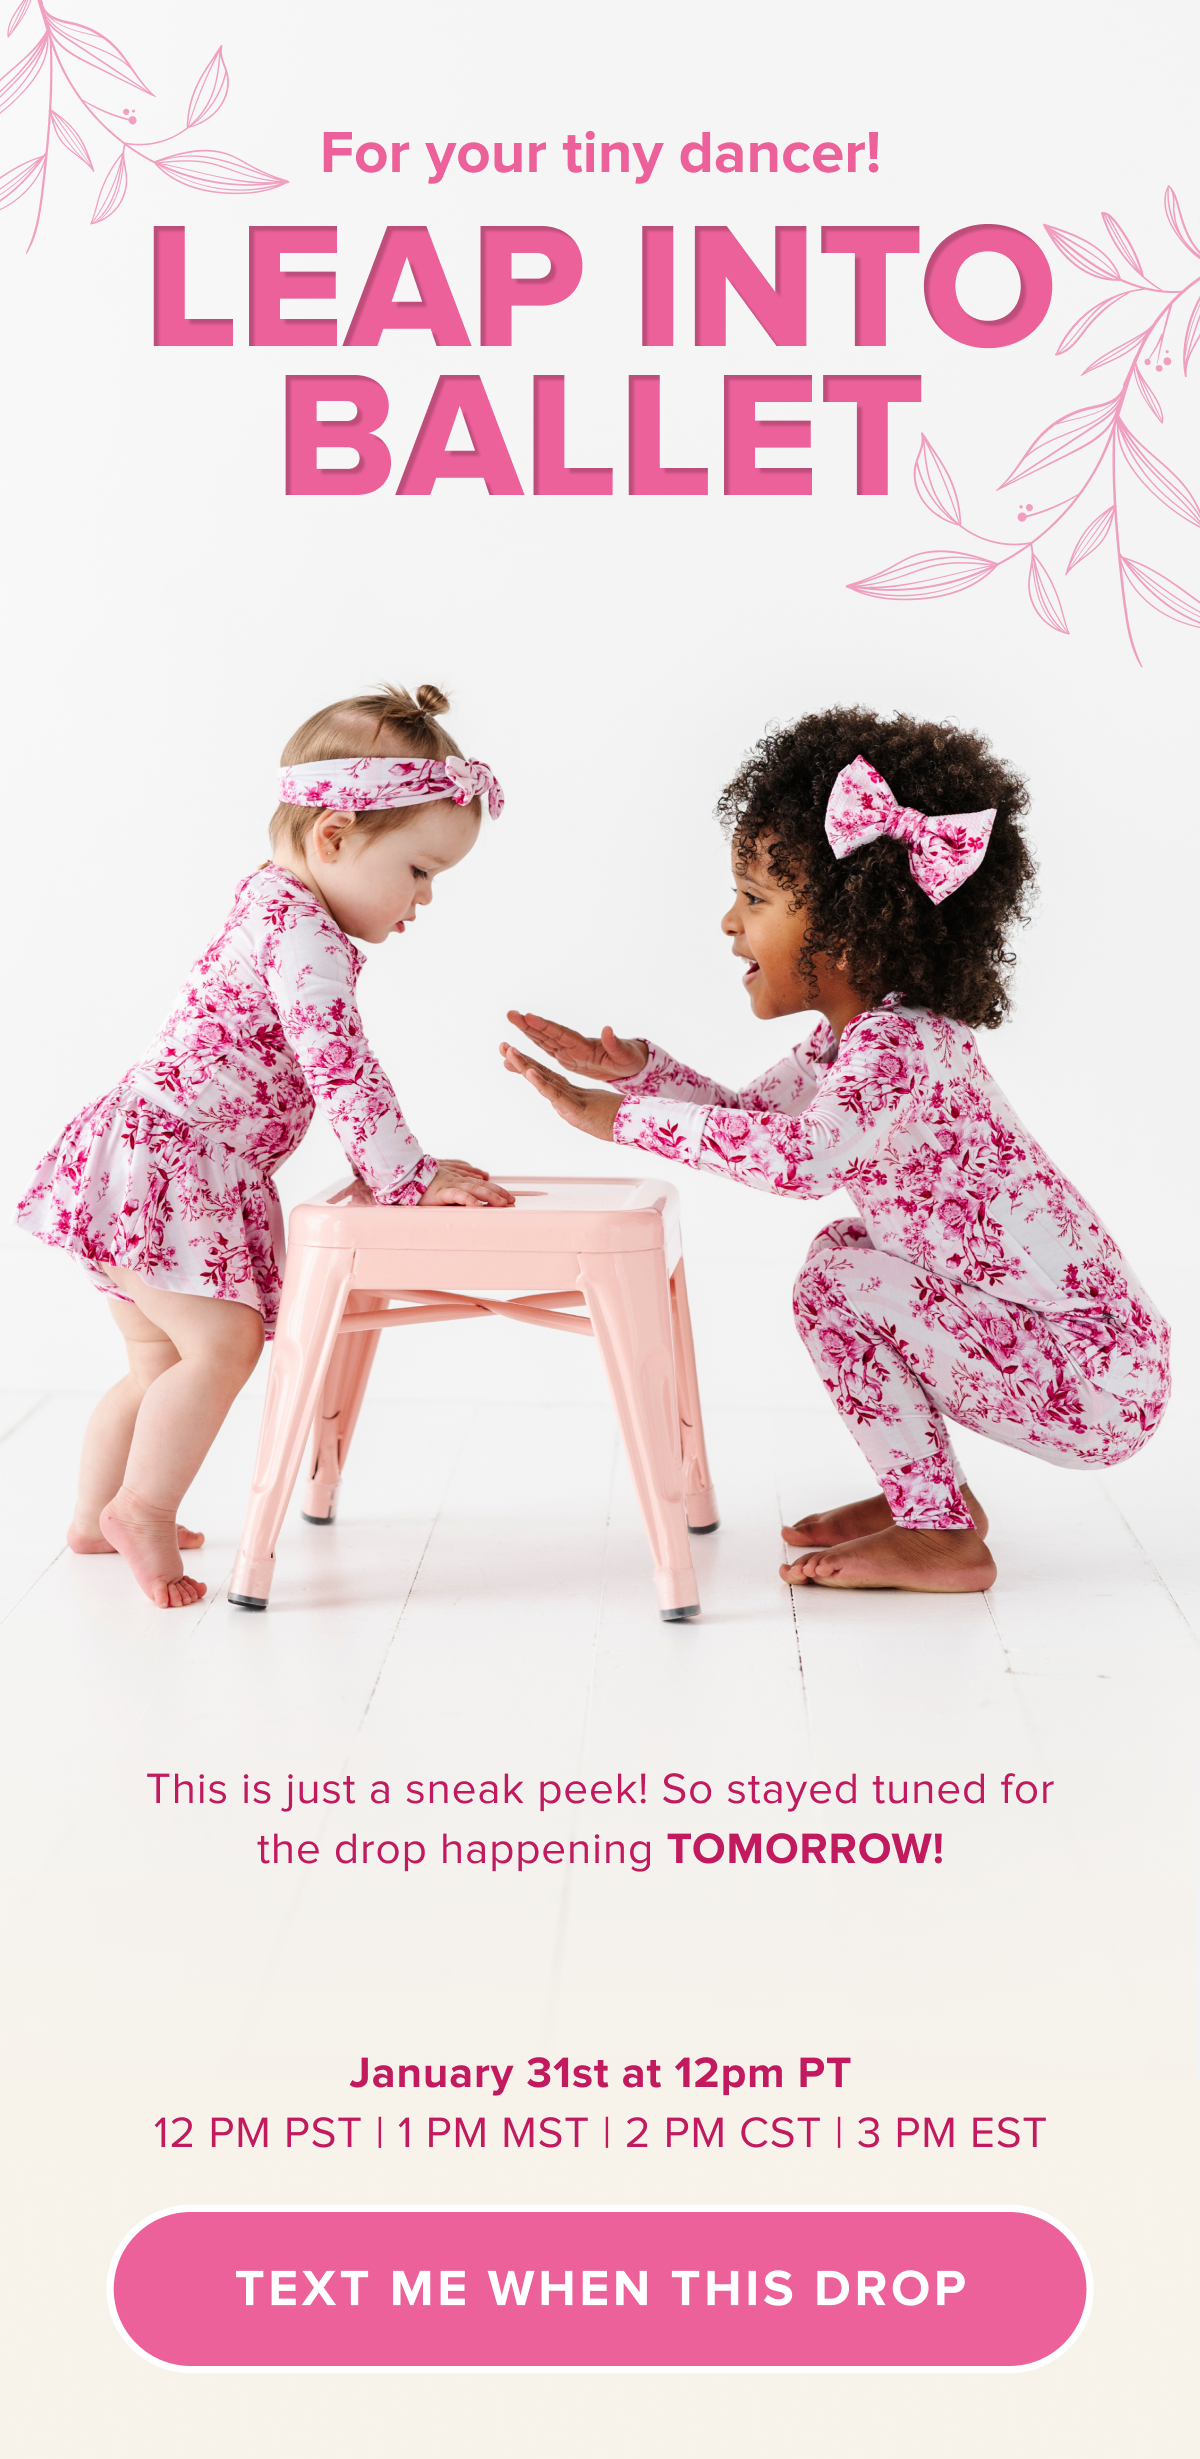 For your tiny dancer… LEAP INTO BALLET